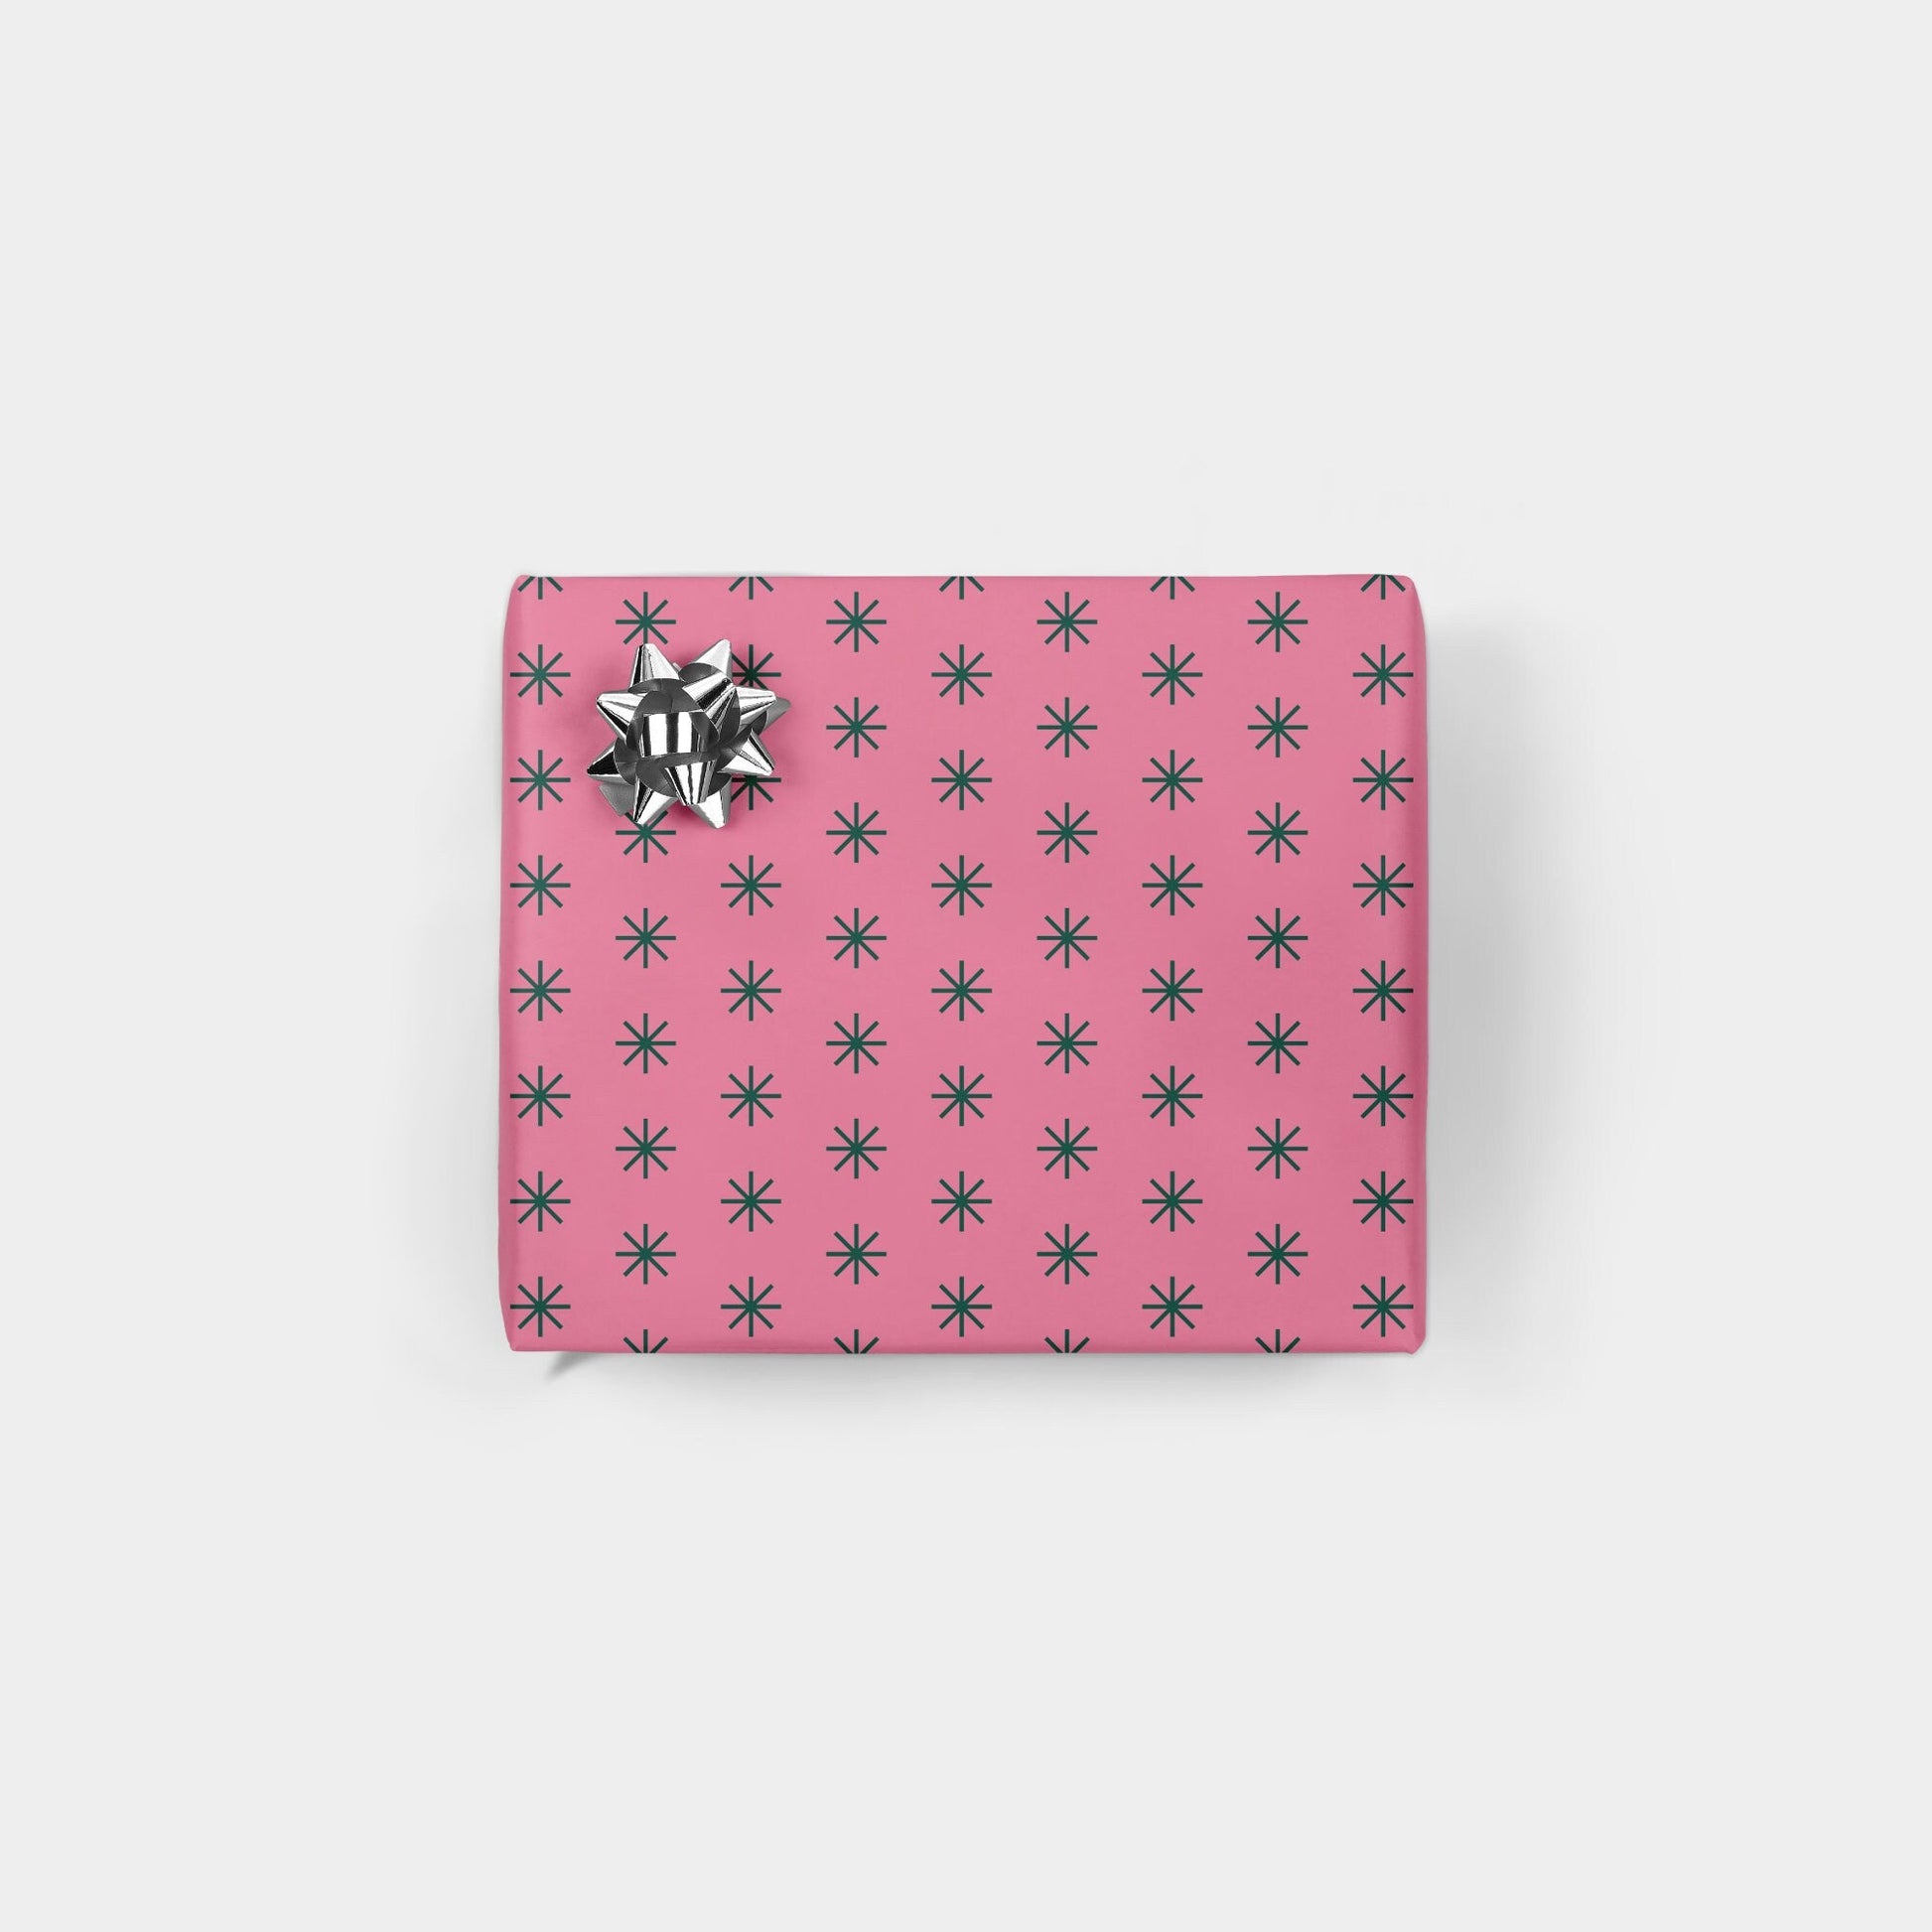 Minimal Bow Holiday Gift Wrap The Design Craft